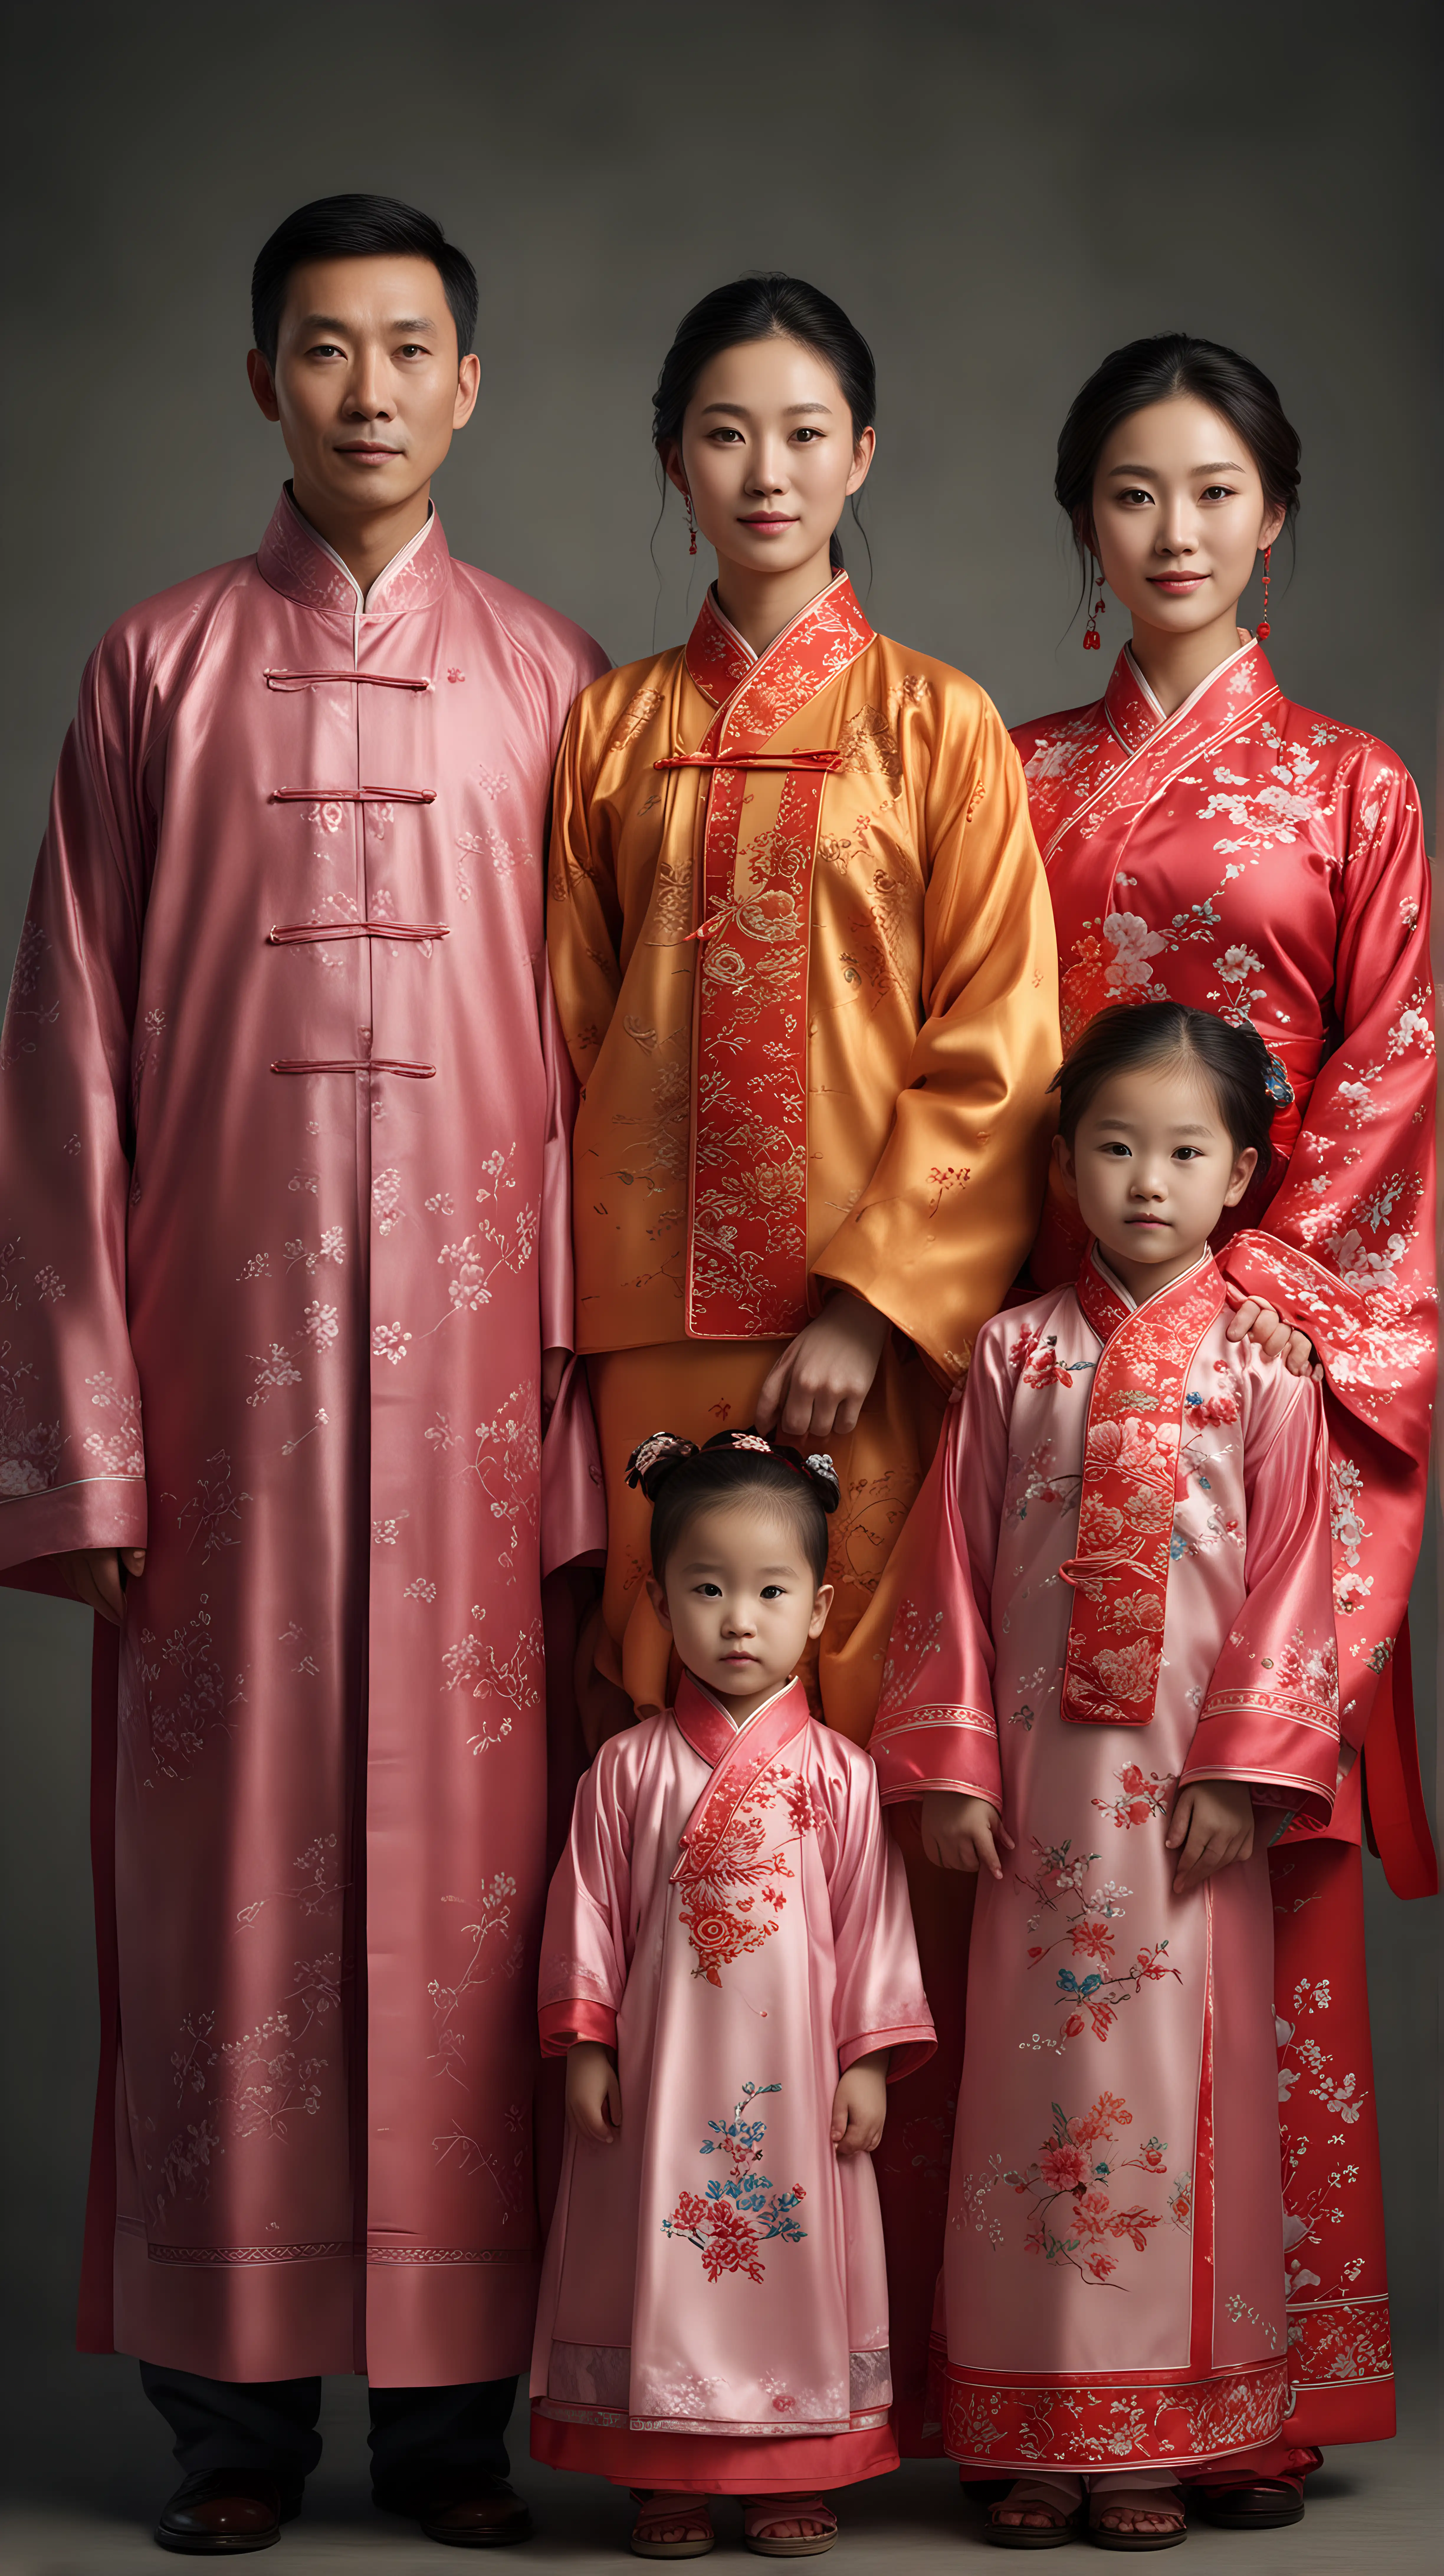 Chinese Family in Traditional Clothing Hyper Realistic Portrait